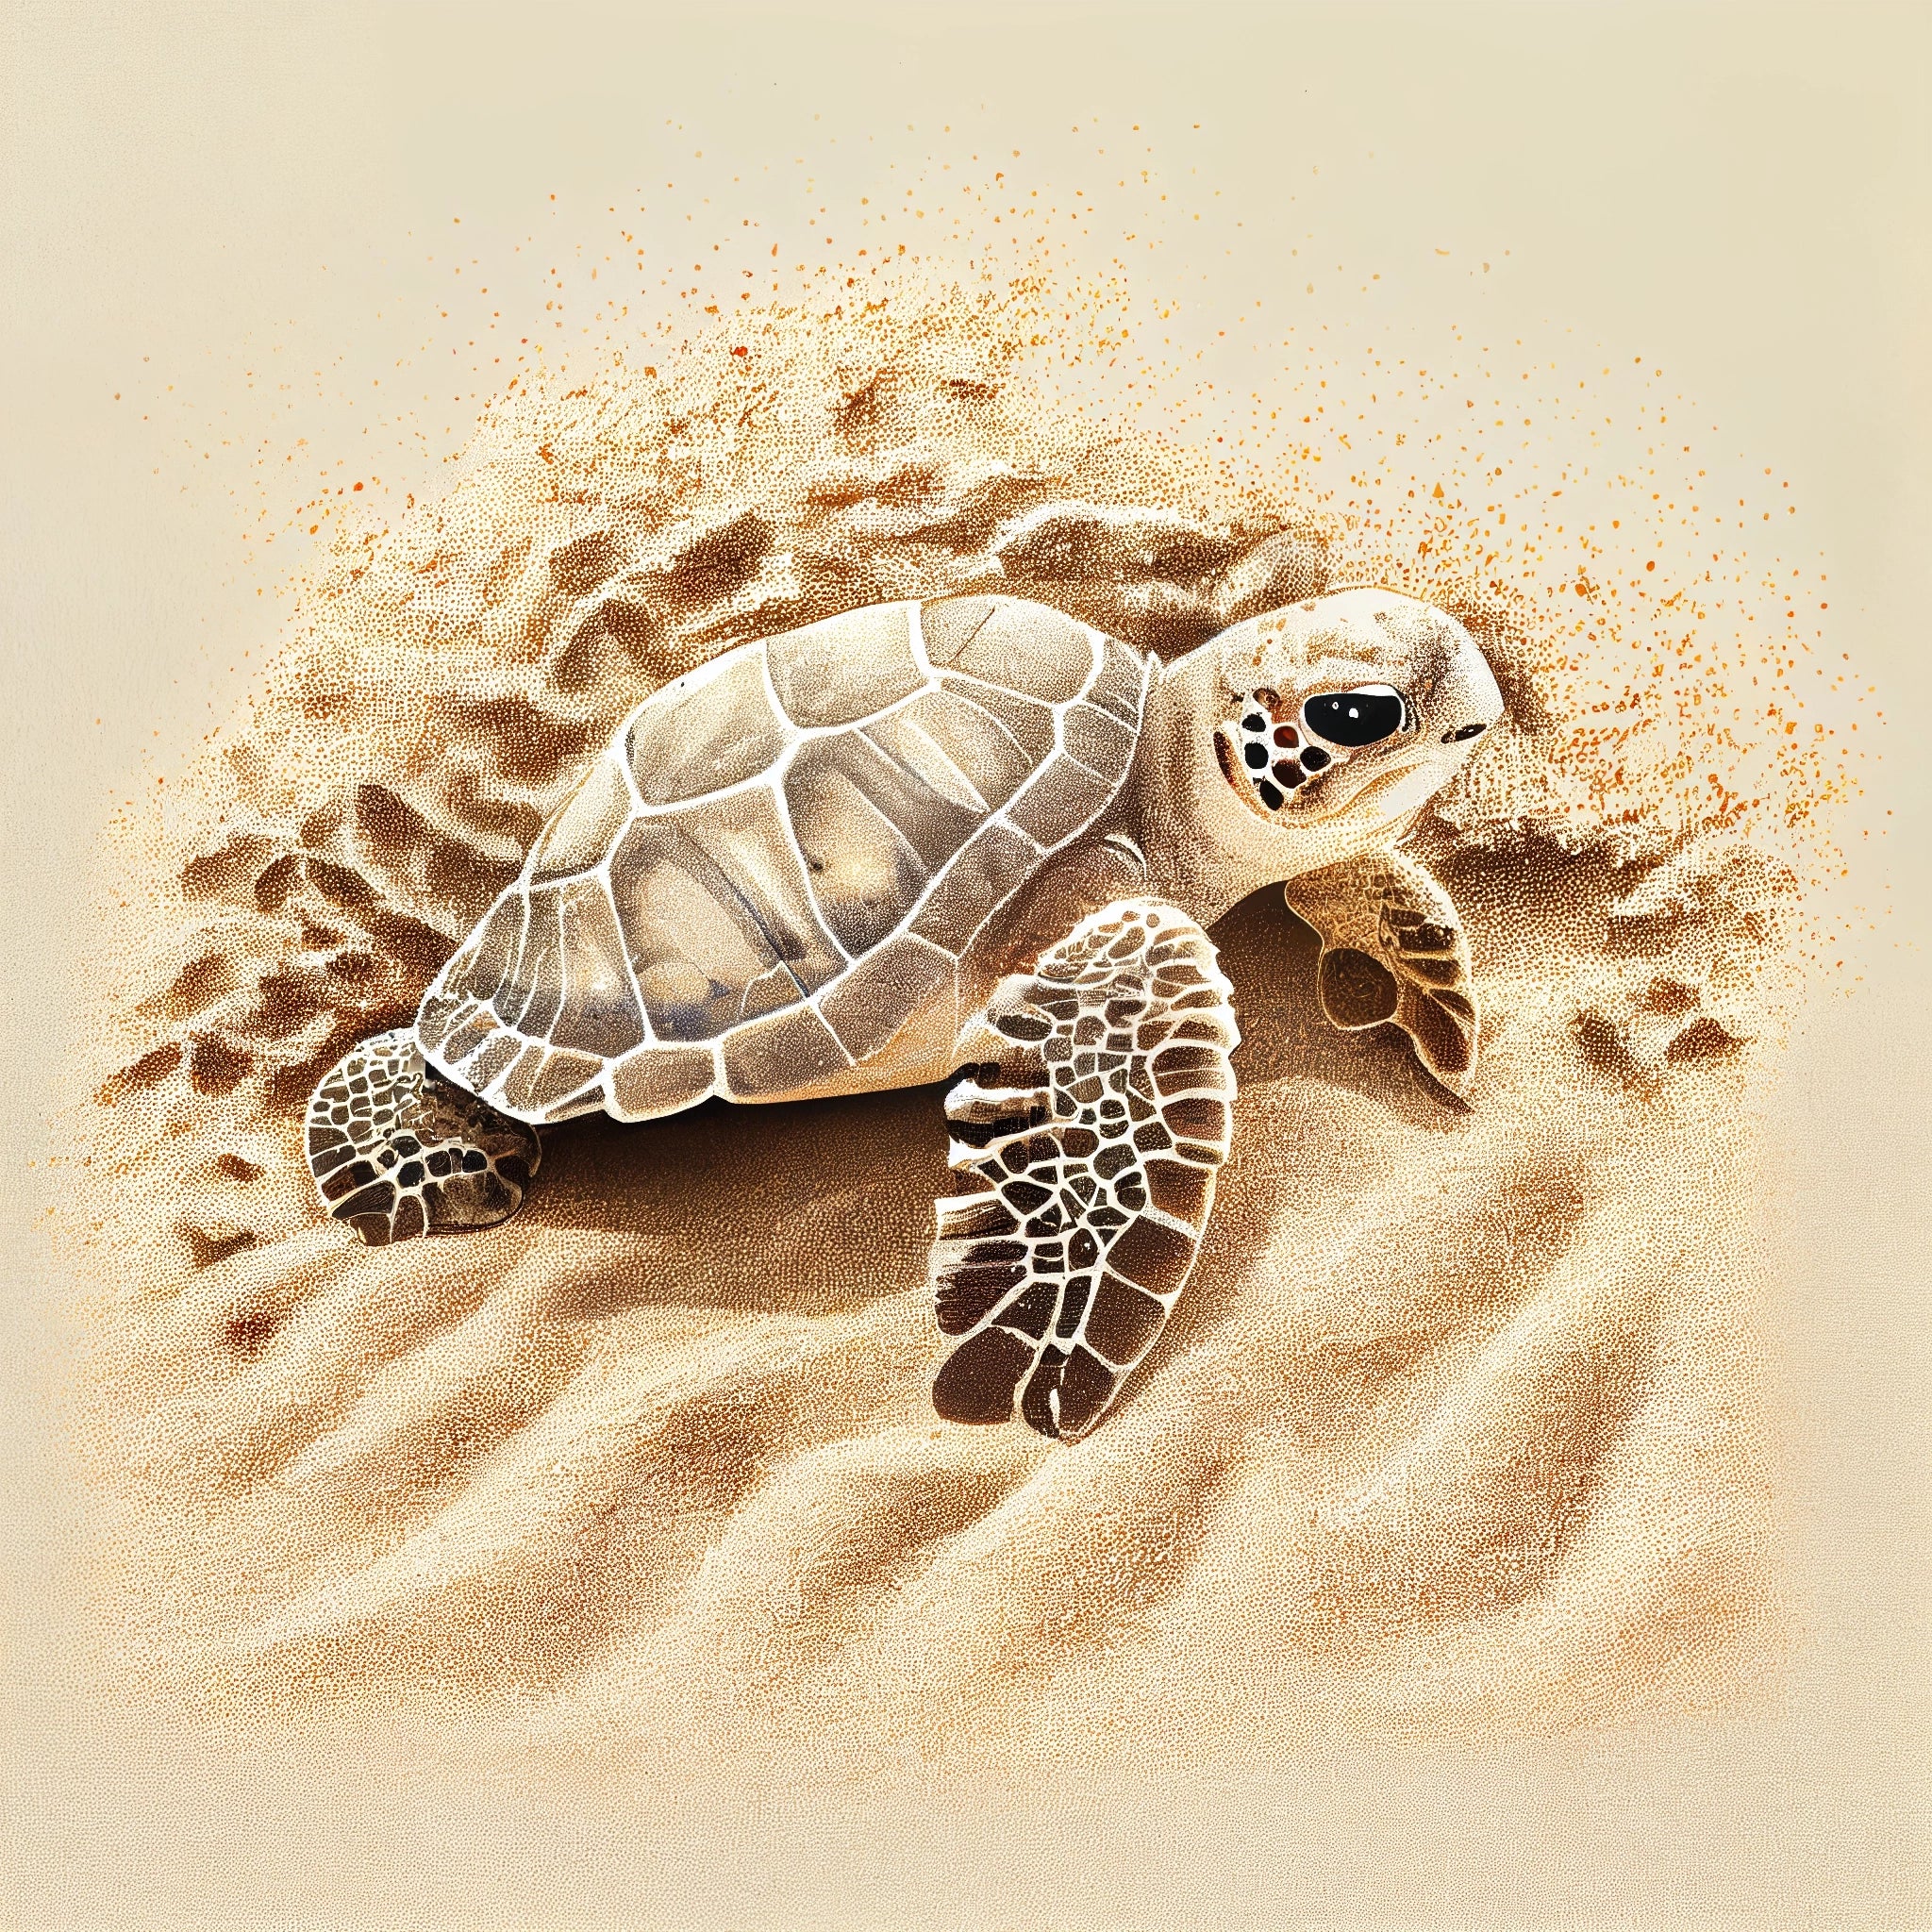 Cute Baby Turtle Spray Color Painting Print on Light Beige Linen-Looking Sand